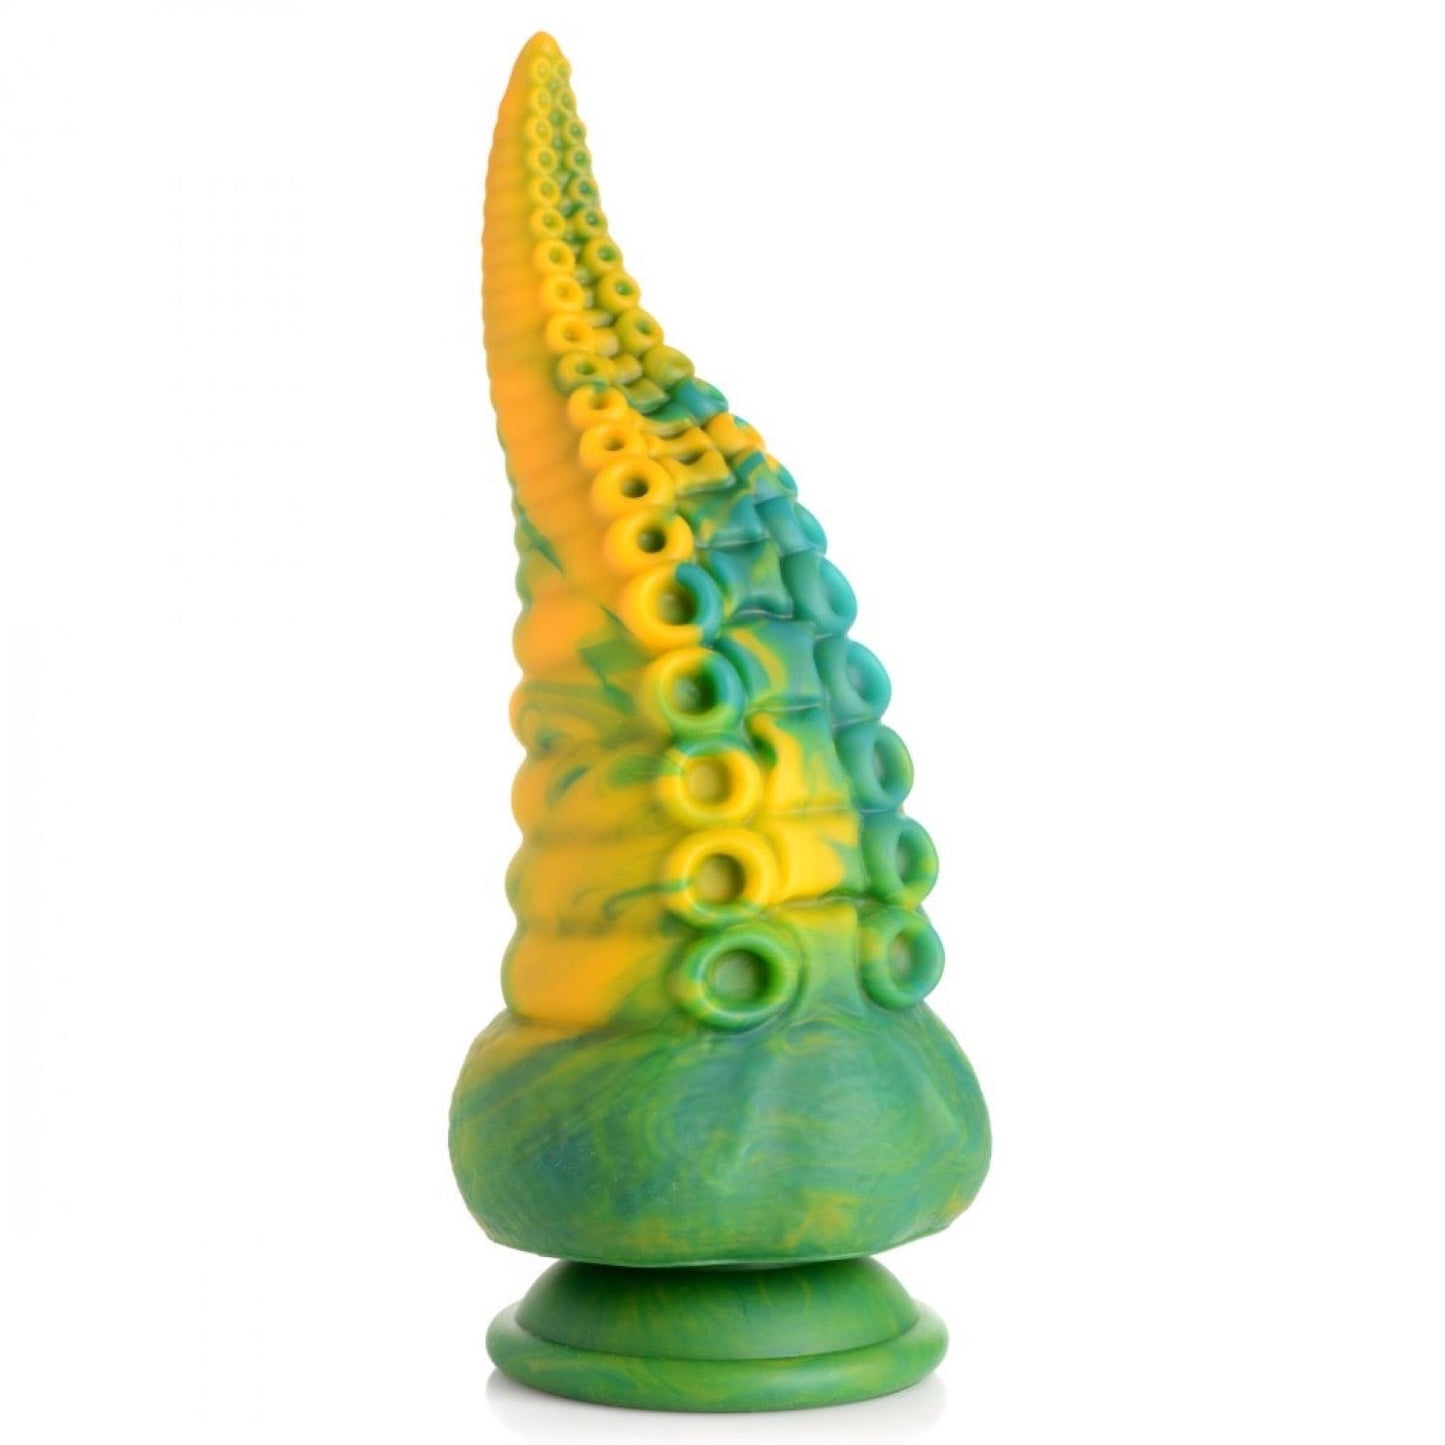 Monstropus Tentacled Monster Silicone 8.5" Dildo